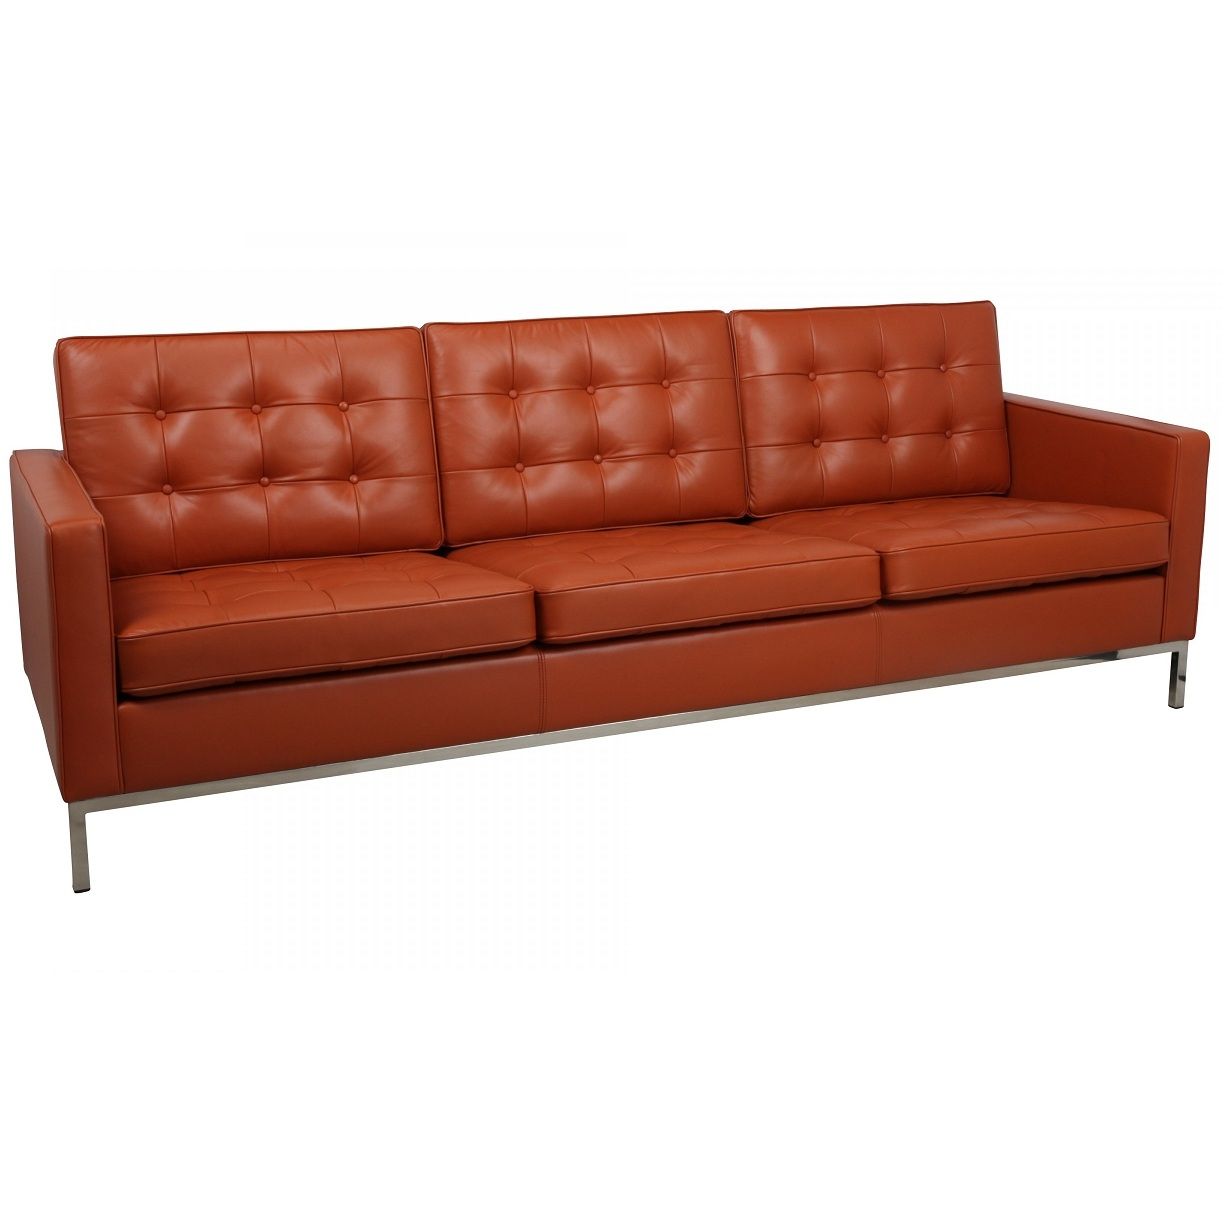 Aniline Leather Florence Knoll 3 Seat Sofa Next Day Delivery Regarding Florence Leather Sofas (View 1 of 15)